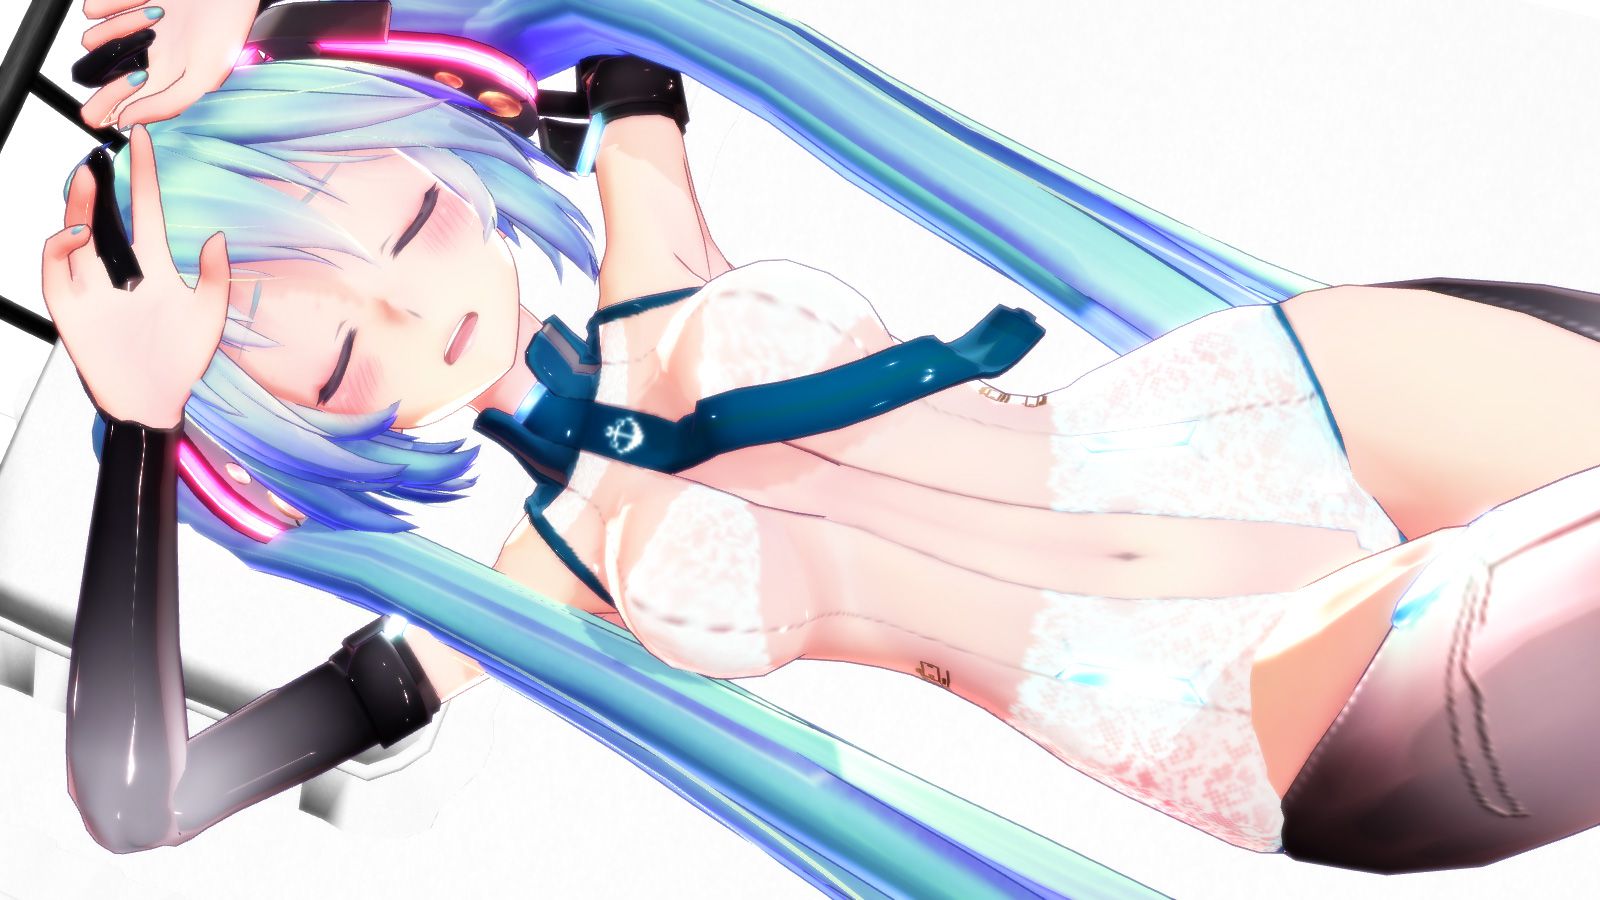 3D erotic images made with the MMD (MikuMikuDance) 4 50 12